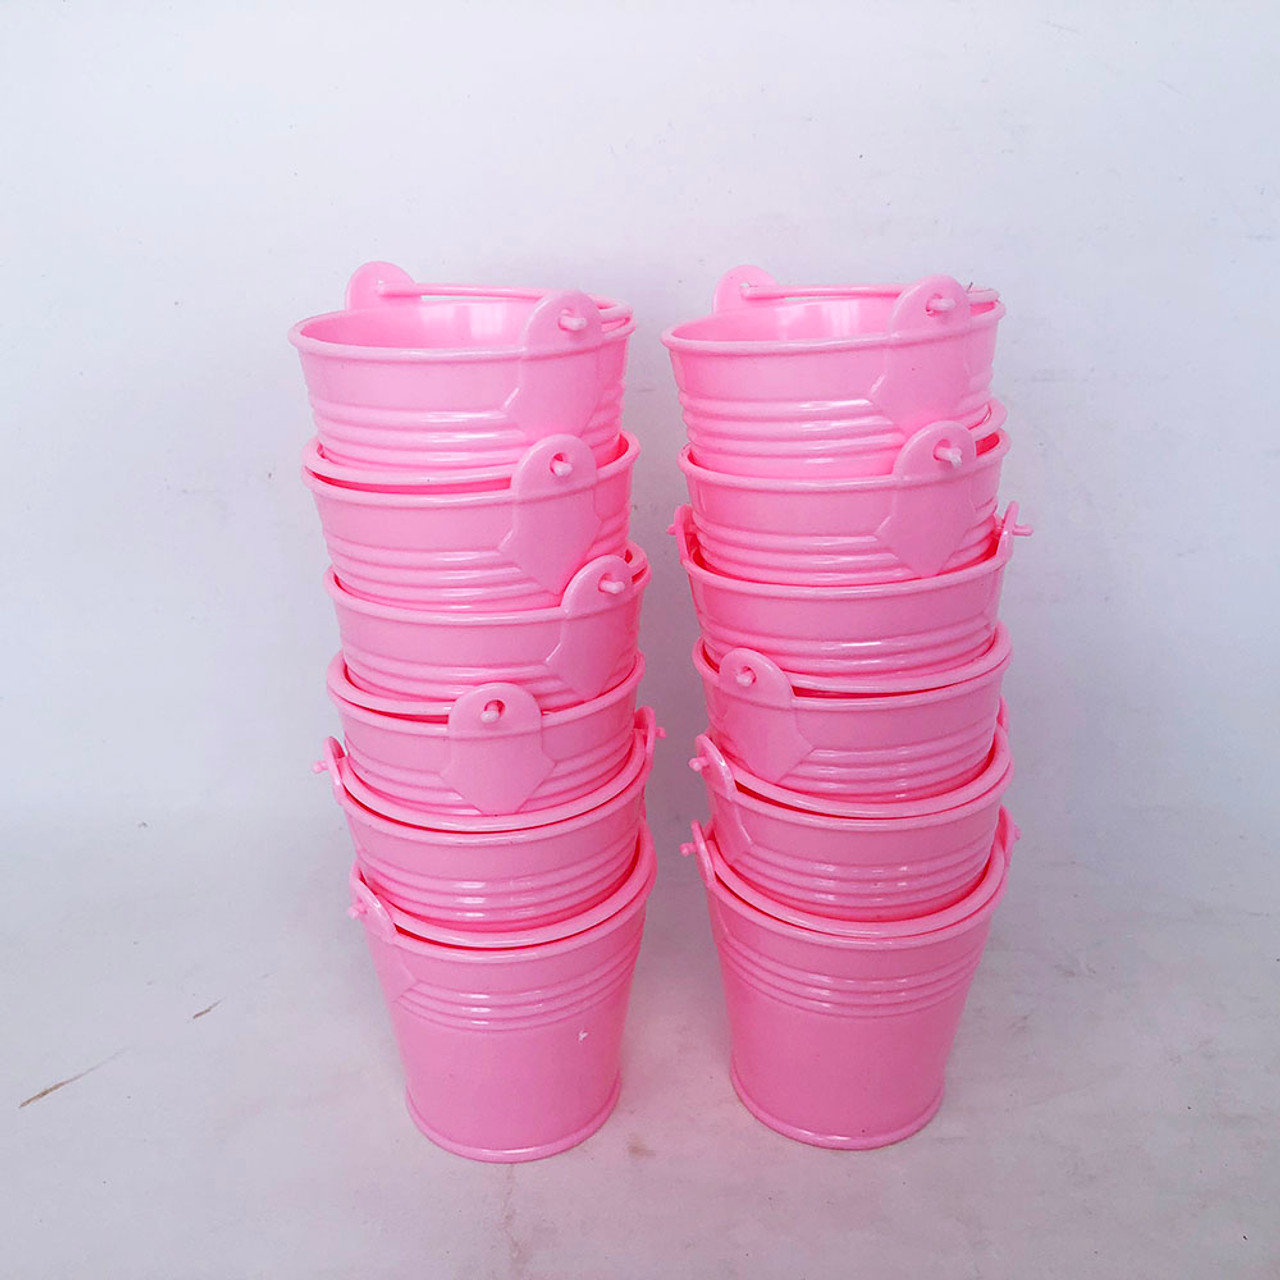 Plastic Buckets For Lucky Bamboo Favor 12 Pack Pink New